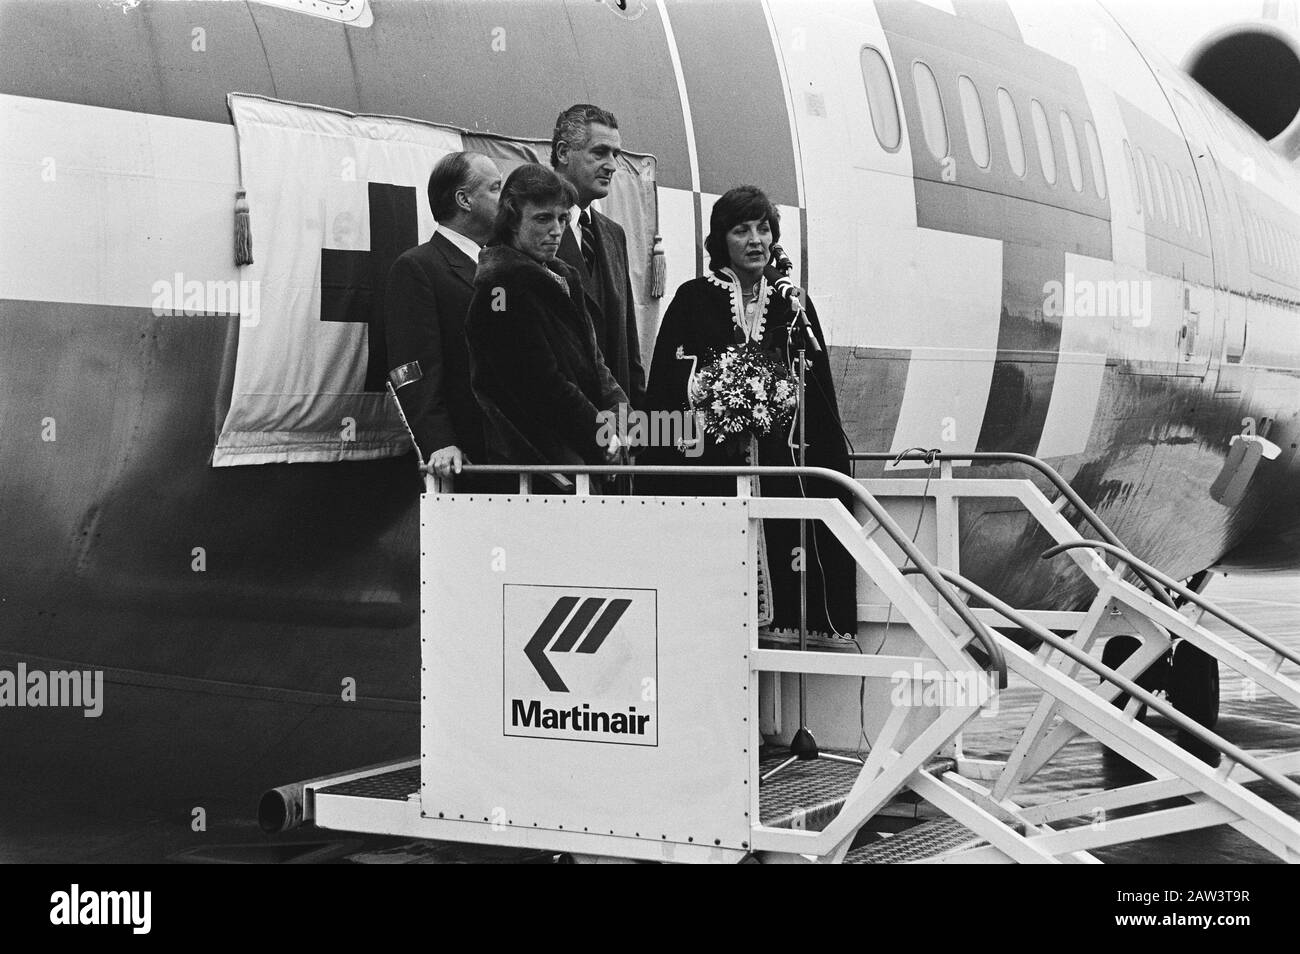 Pr. Daisy-named DC 10 at the airport to Henry J. Dunant freight relief supplies to Cambodia  Princess Margaret during name disclosure; Furthermore, v.l.n.r. Gualtheris [Guup] baron Kraijenhoff, chairman of the Dutch Red Cross, unknown and Martin Schröder, director of Martinair Date: November 23, 1979 Location: North-Holland, Schiphol Keywords: directors, princesses, rituals, airplanes Person Name: Kraijenhoff, Gualtheris baron, Kraijenhoff, Guup, Margriet (princess Netherlands), Schröder, Martin Stock Photo